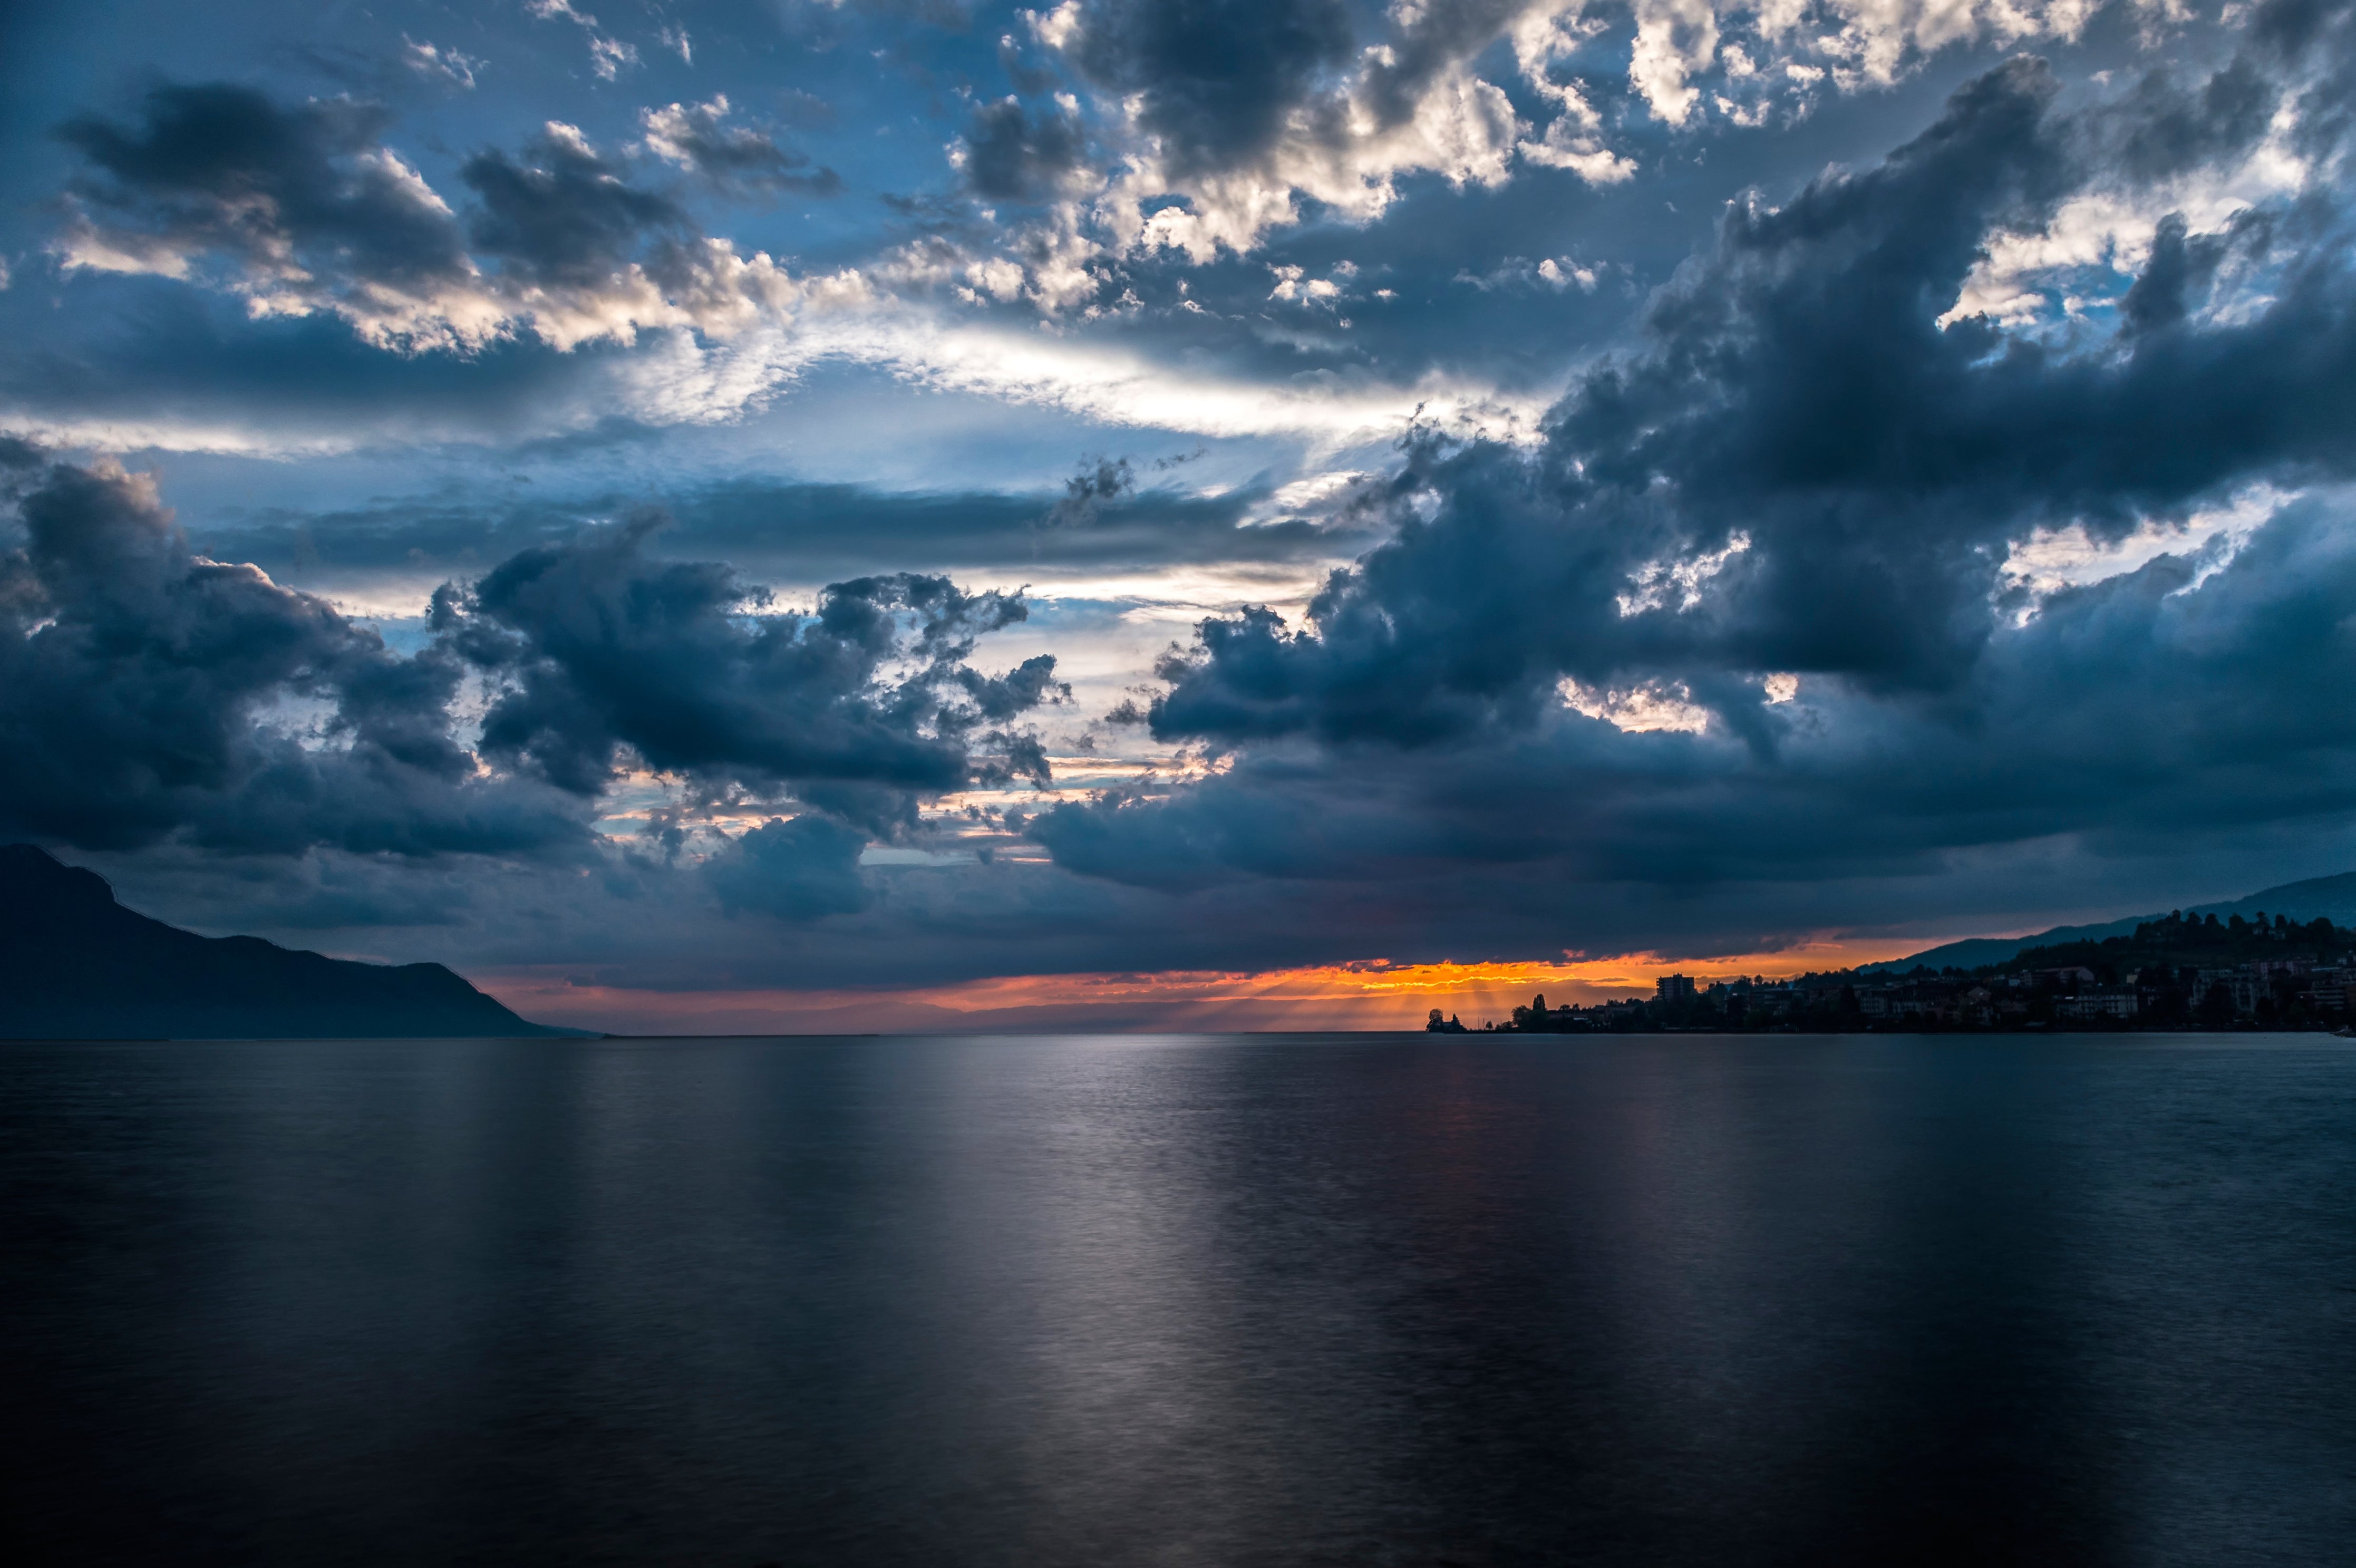 Lake Geneva Switzerland The City Of Montreux Sky Clouds